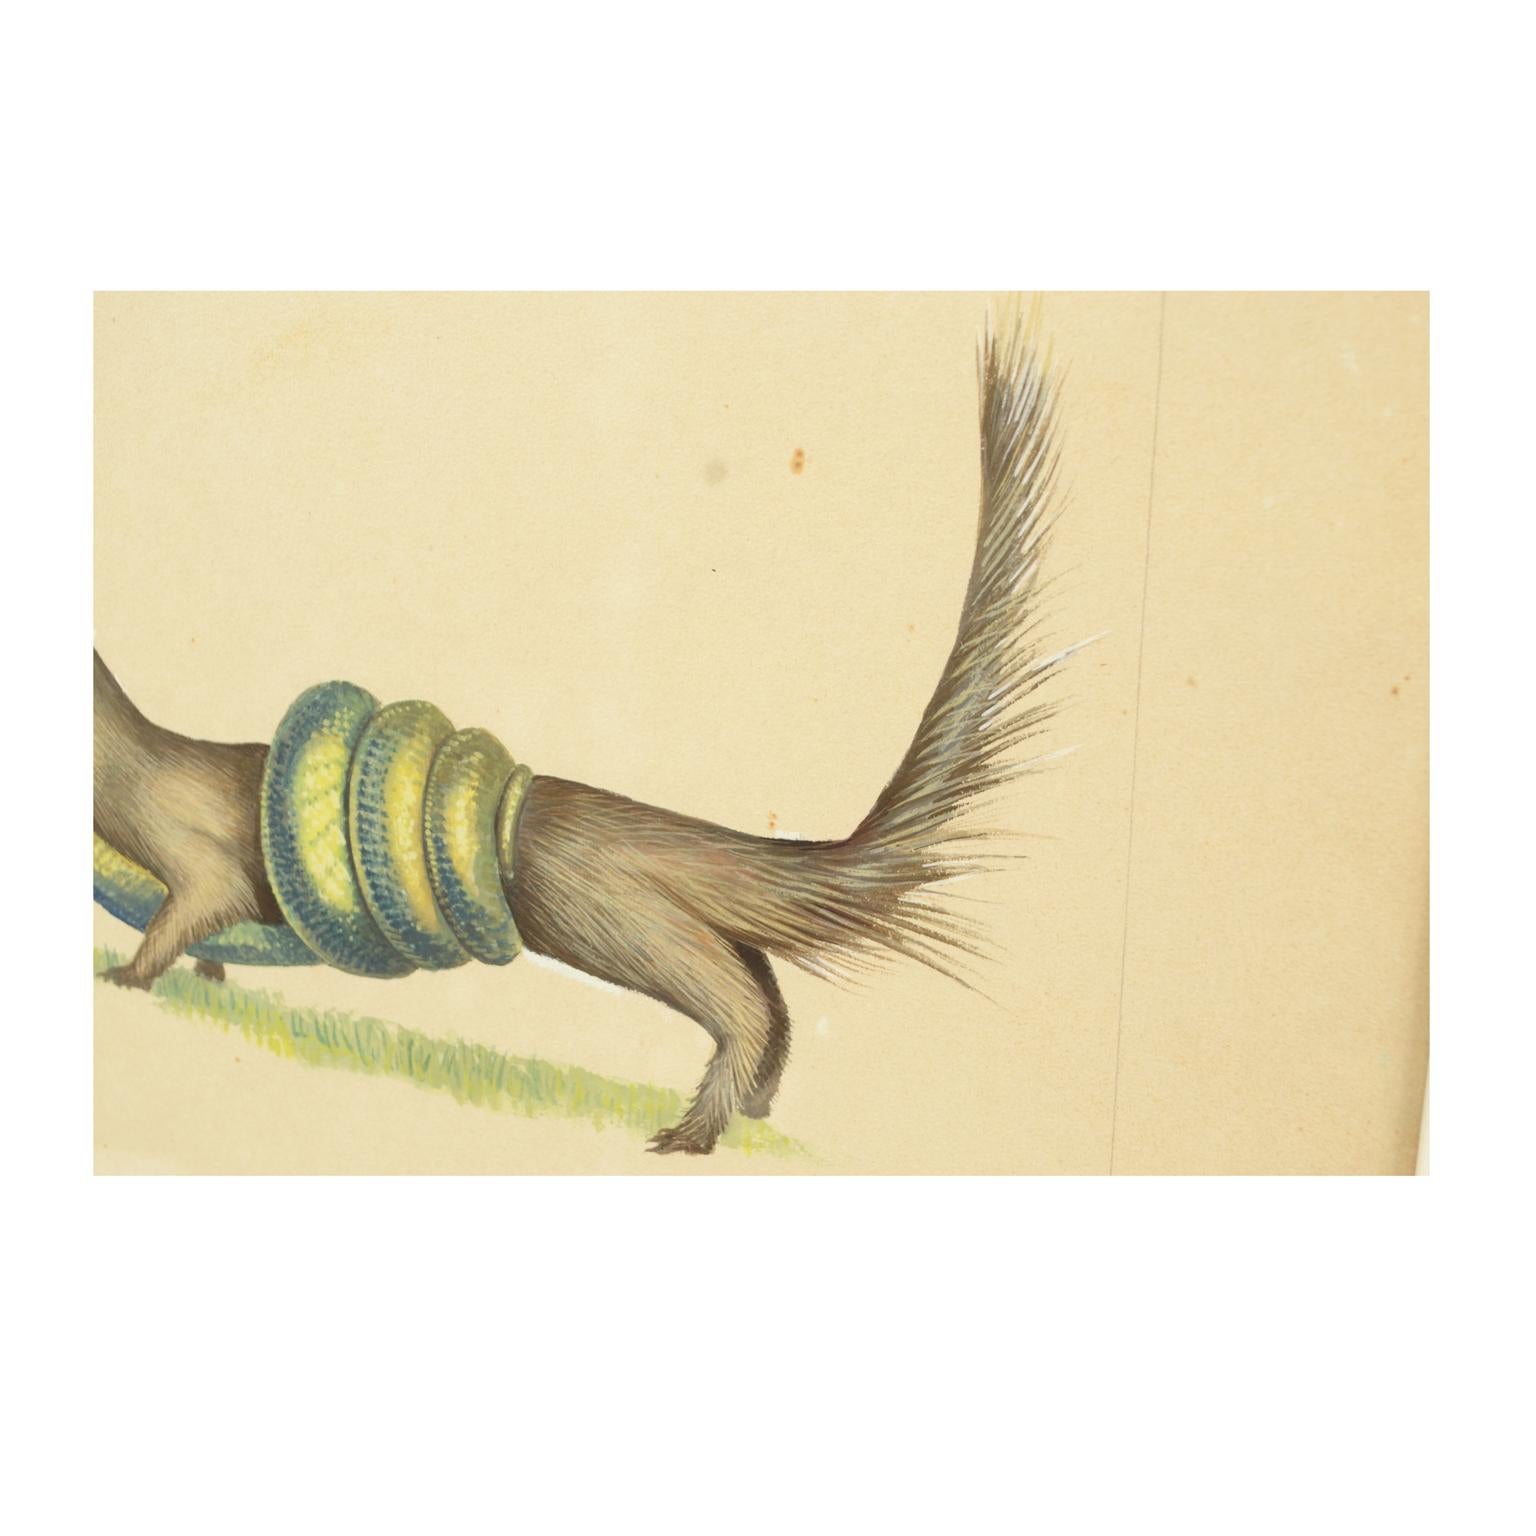 Sketch of a weasel Korea 1970s Acrylic on Paper for an Animals Encyclopedia In Good Condition For Sale In Milan, IT